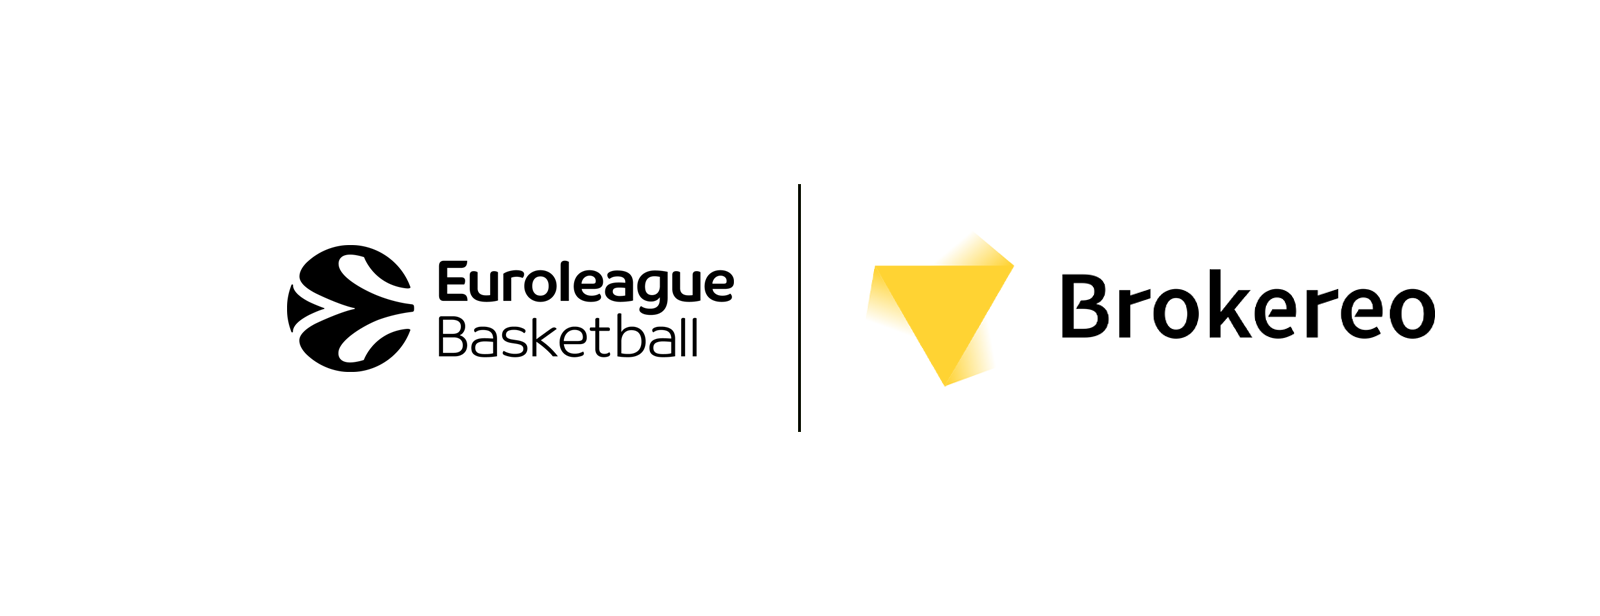 EB Press Release: Brokereo becomes official CFD Partner of Euroleague ...